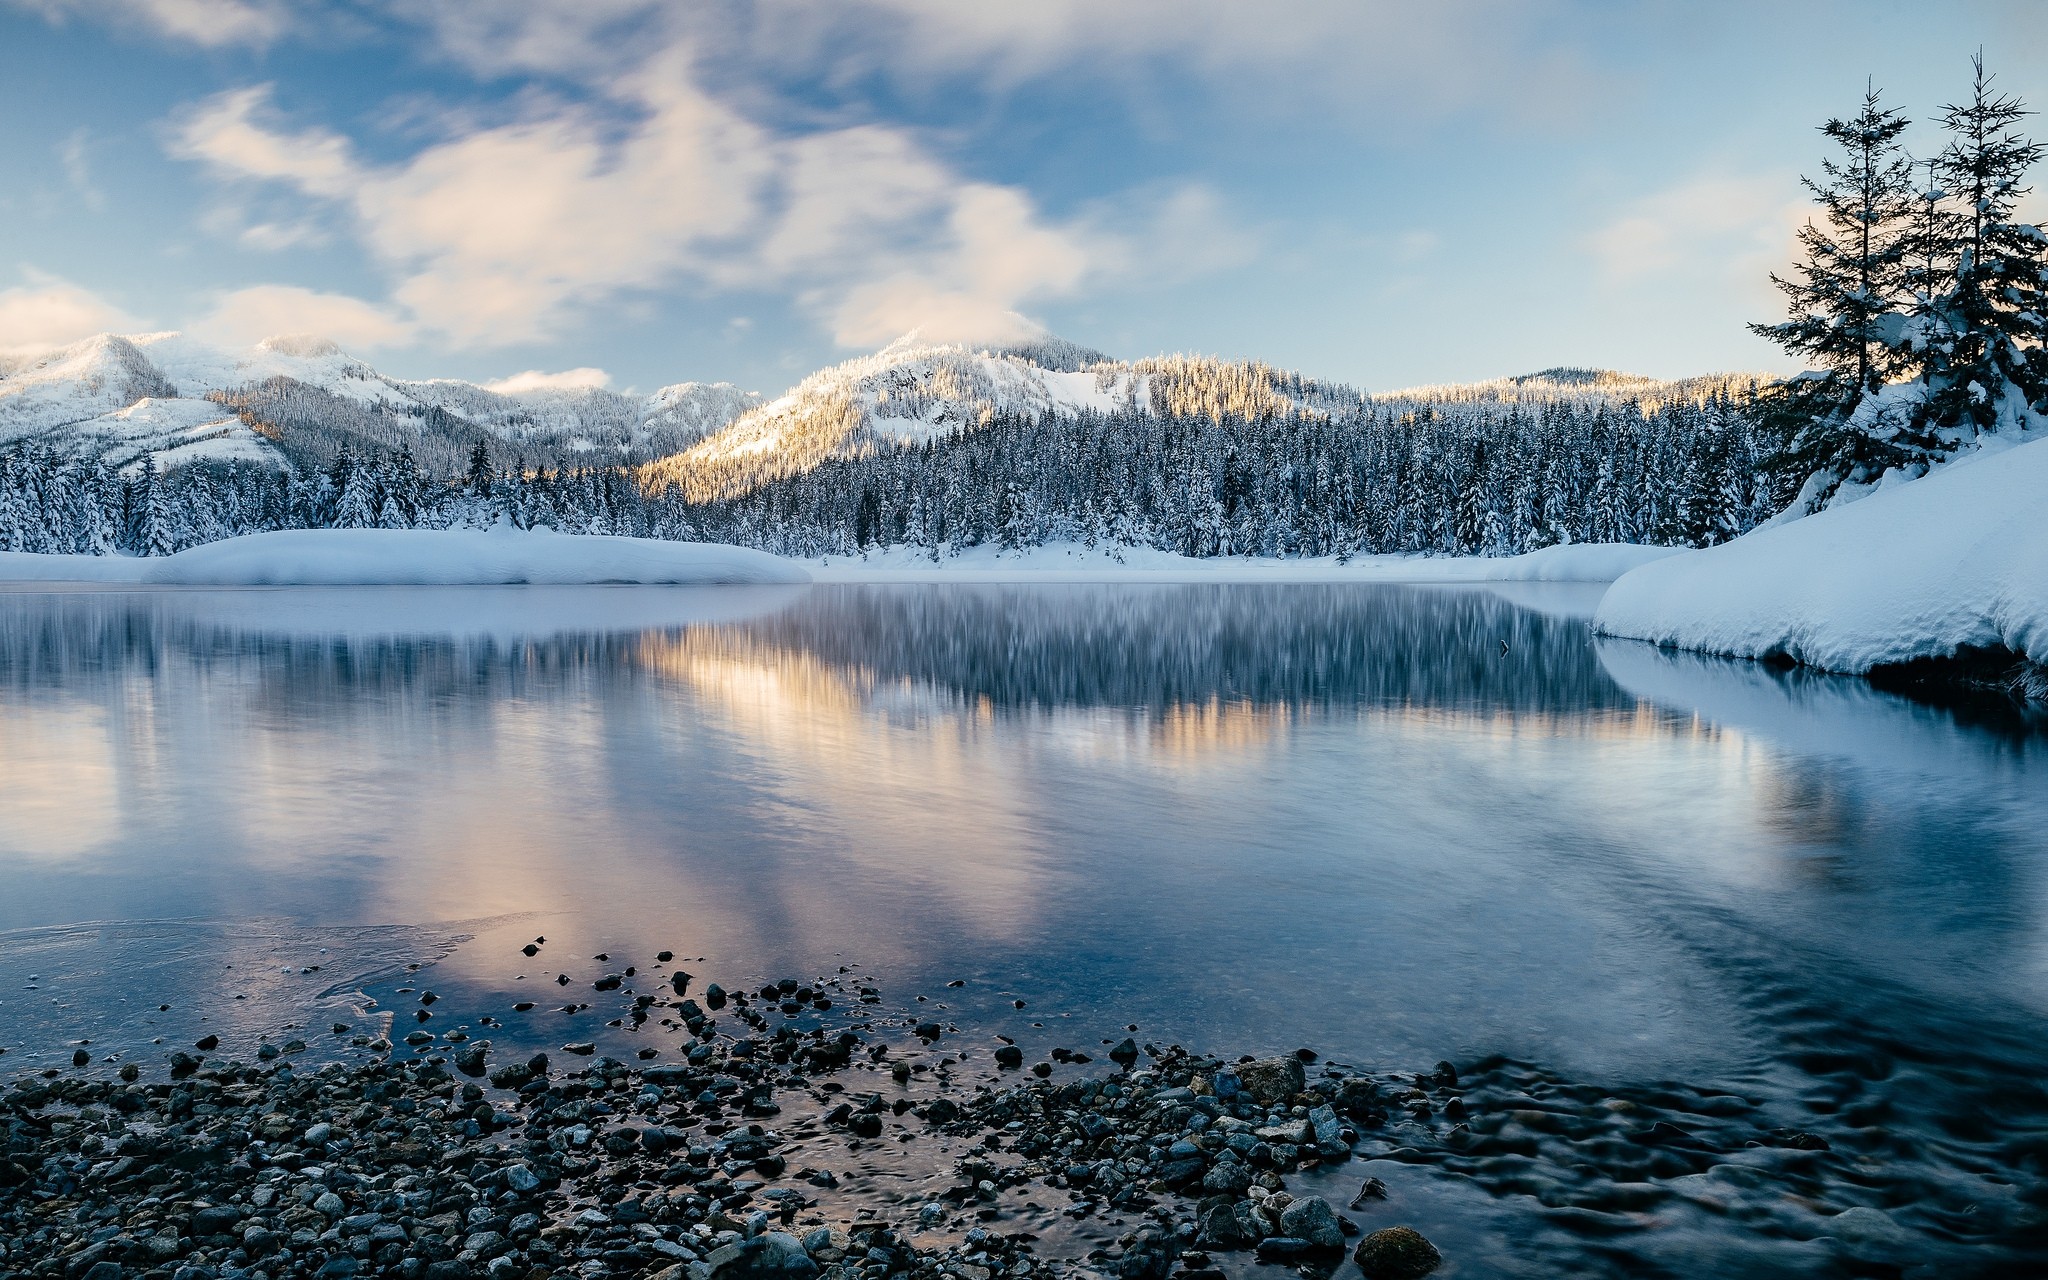 General 2048x1280 landscape photography nature lake mountains forest morning sunlight snow winter reflection Washington (state) USA cold outdoors ice water